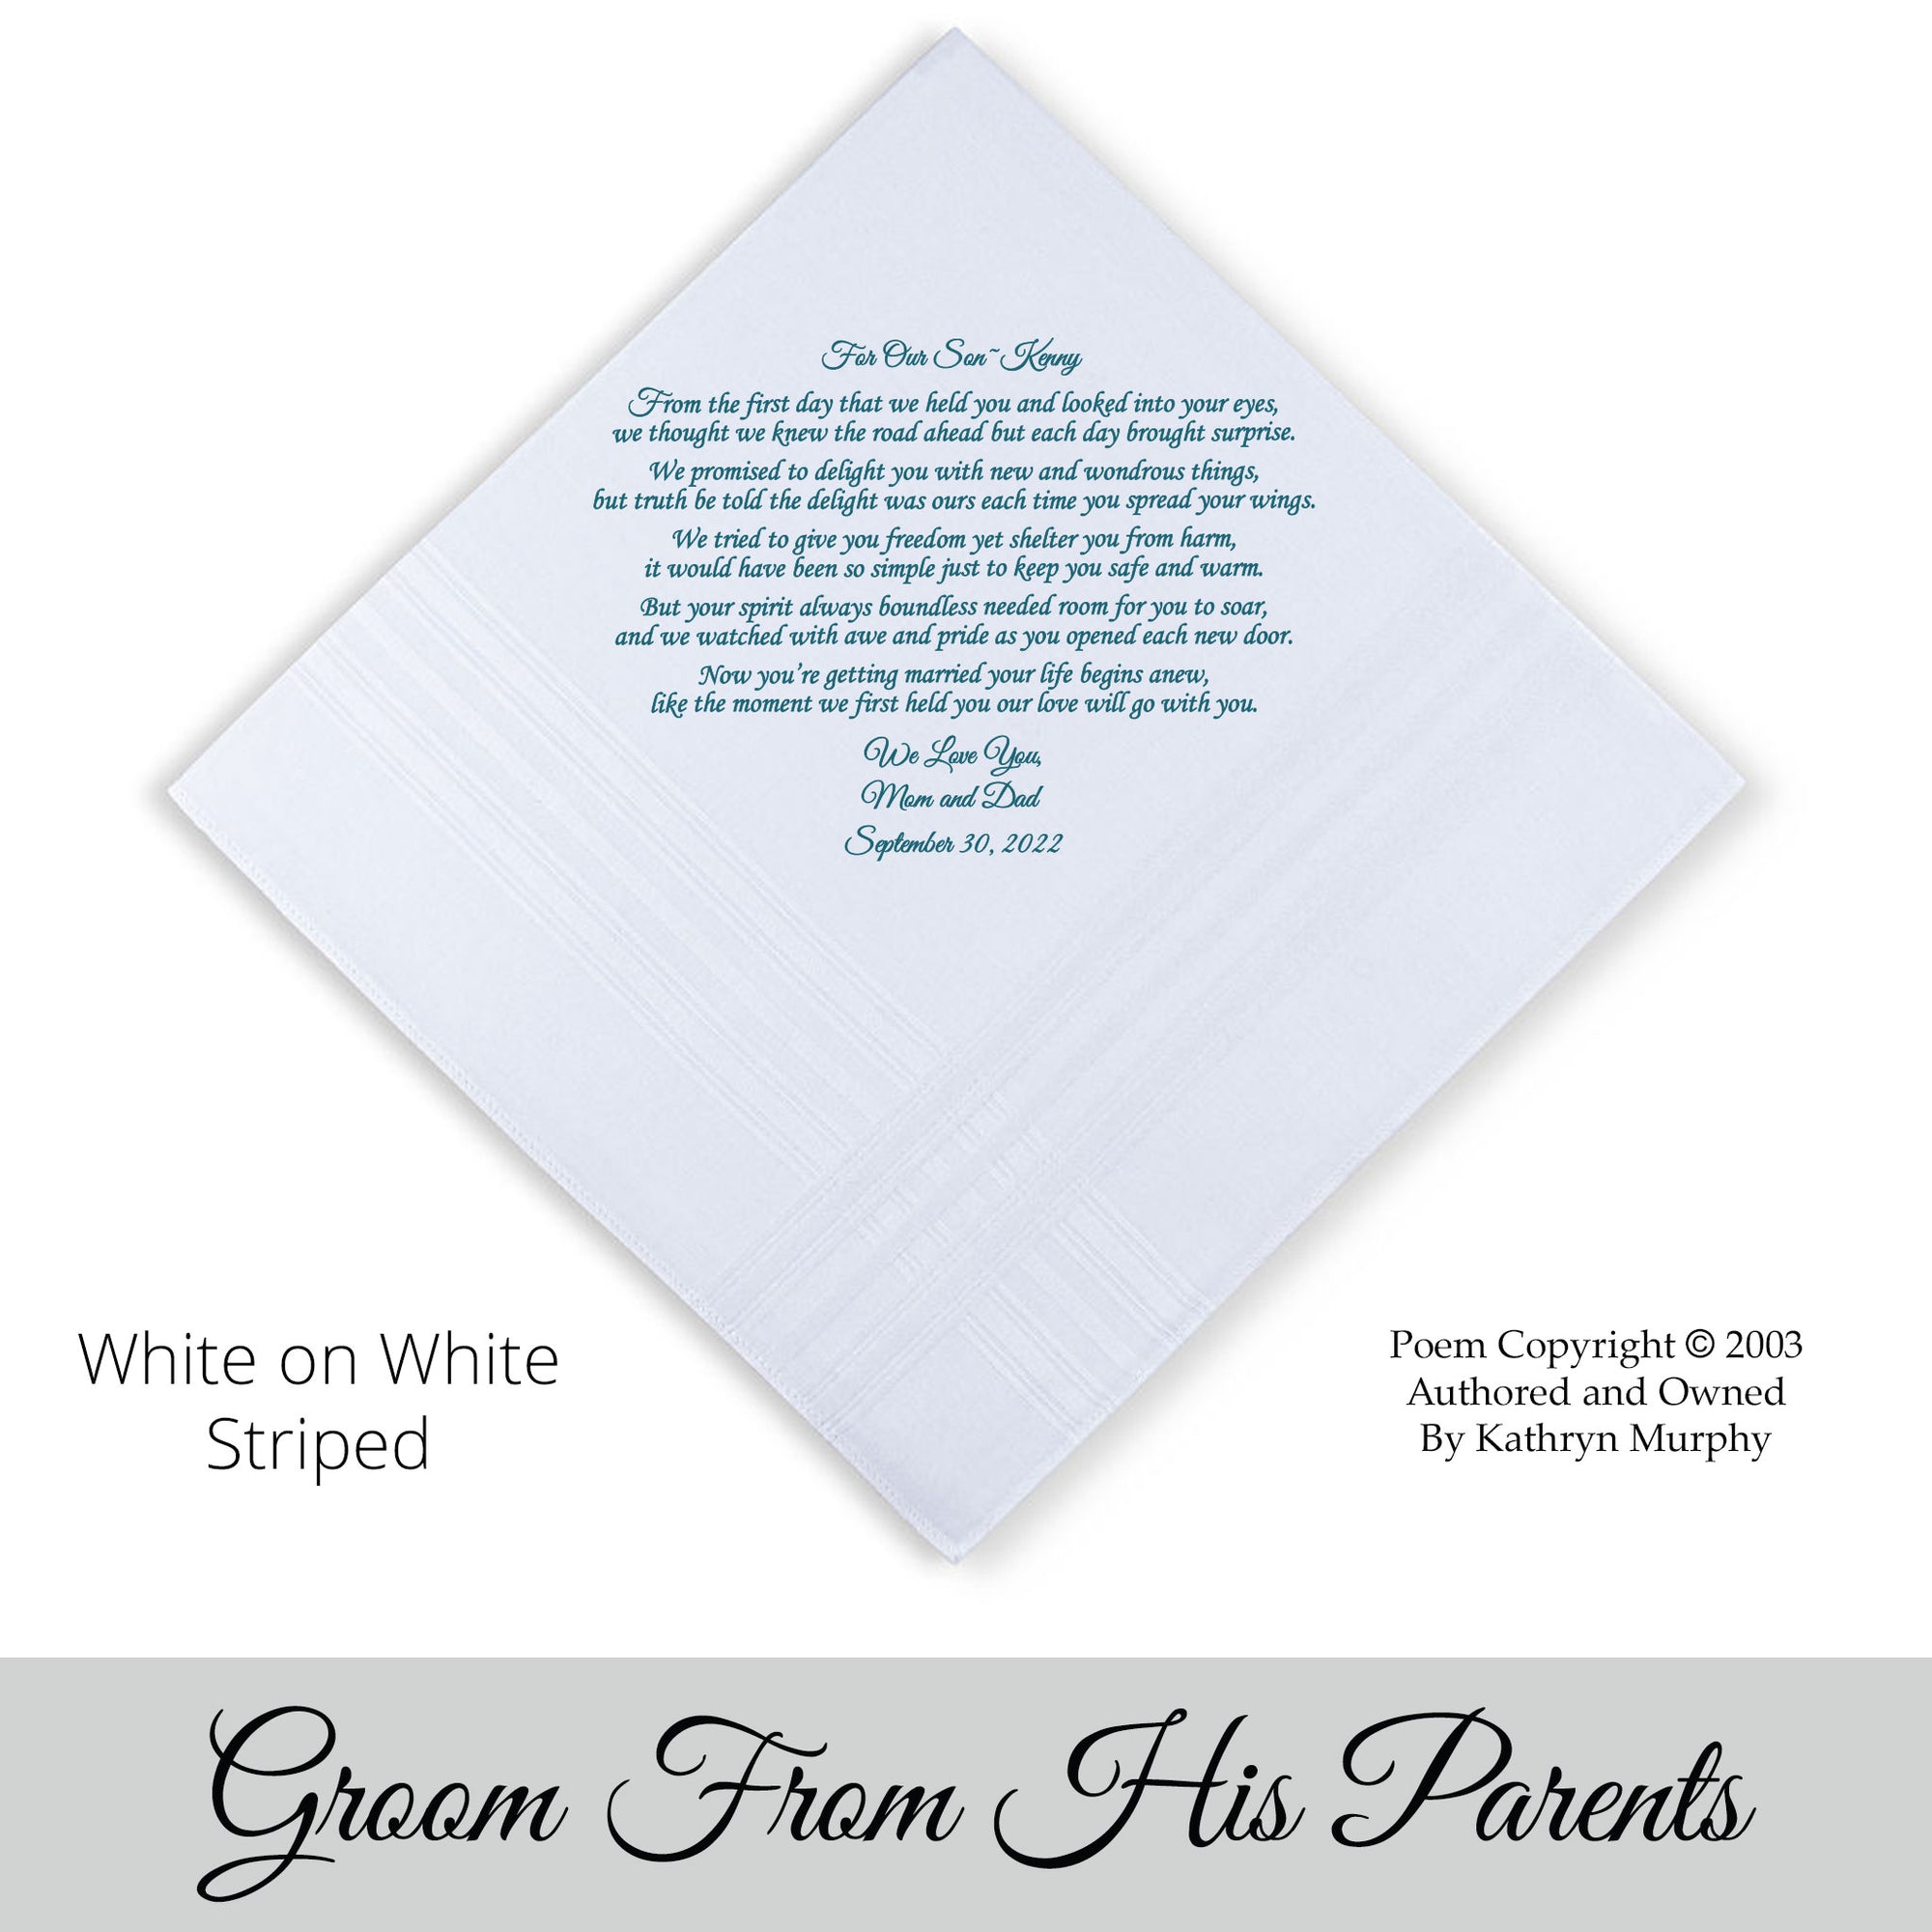 Personalized printed Handkerchief for the groom from his parents "For Our Son" 